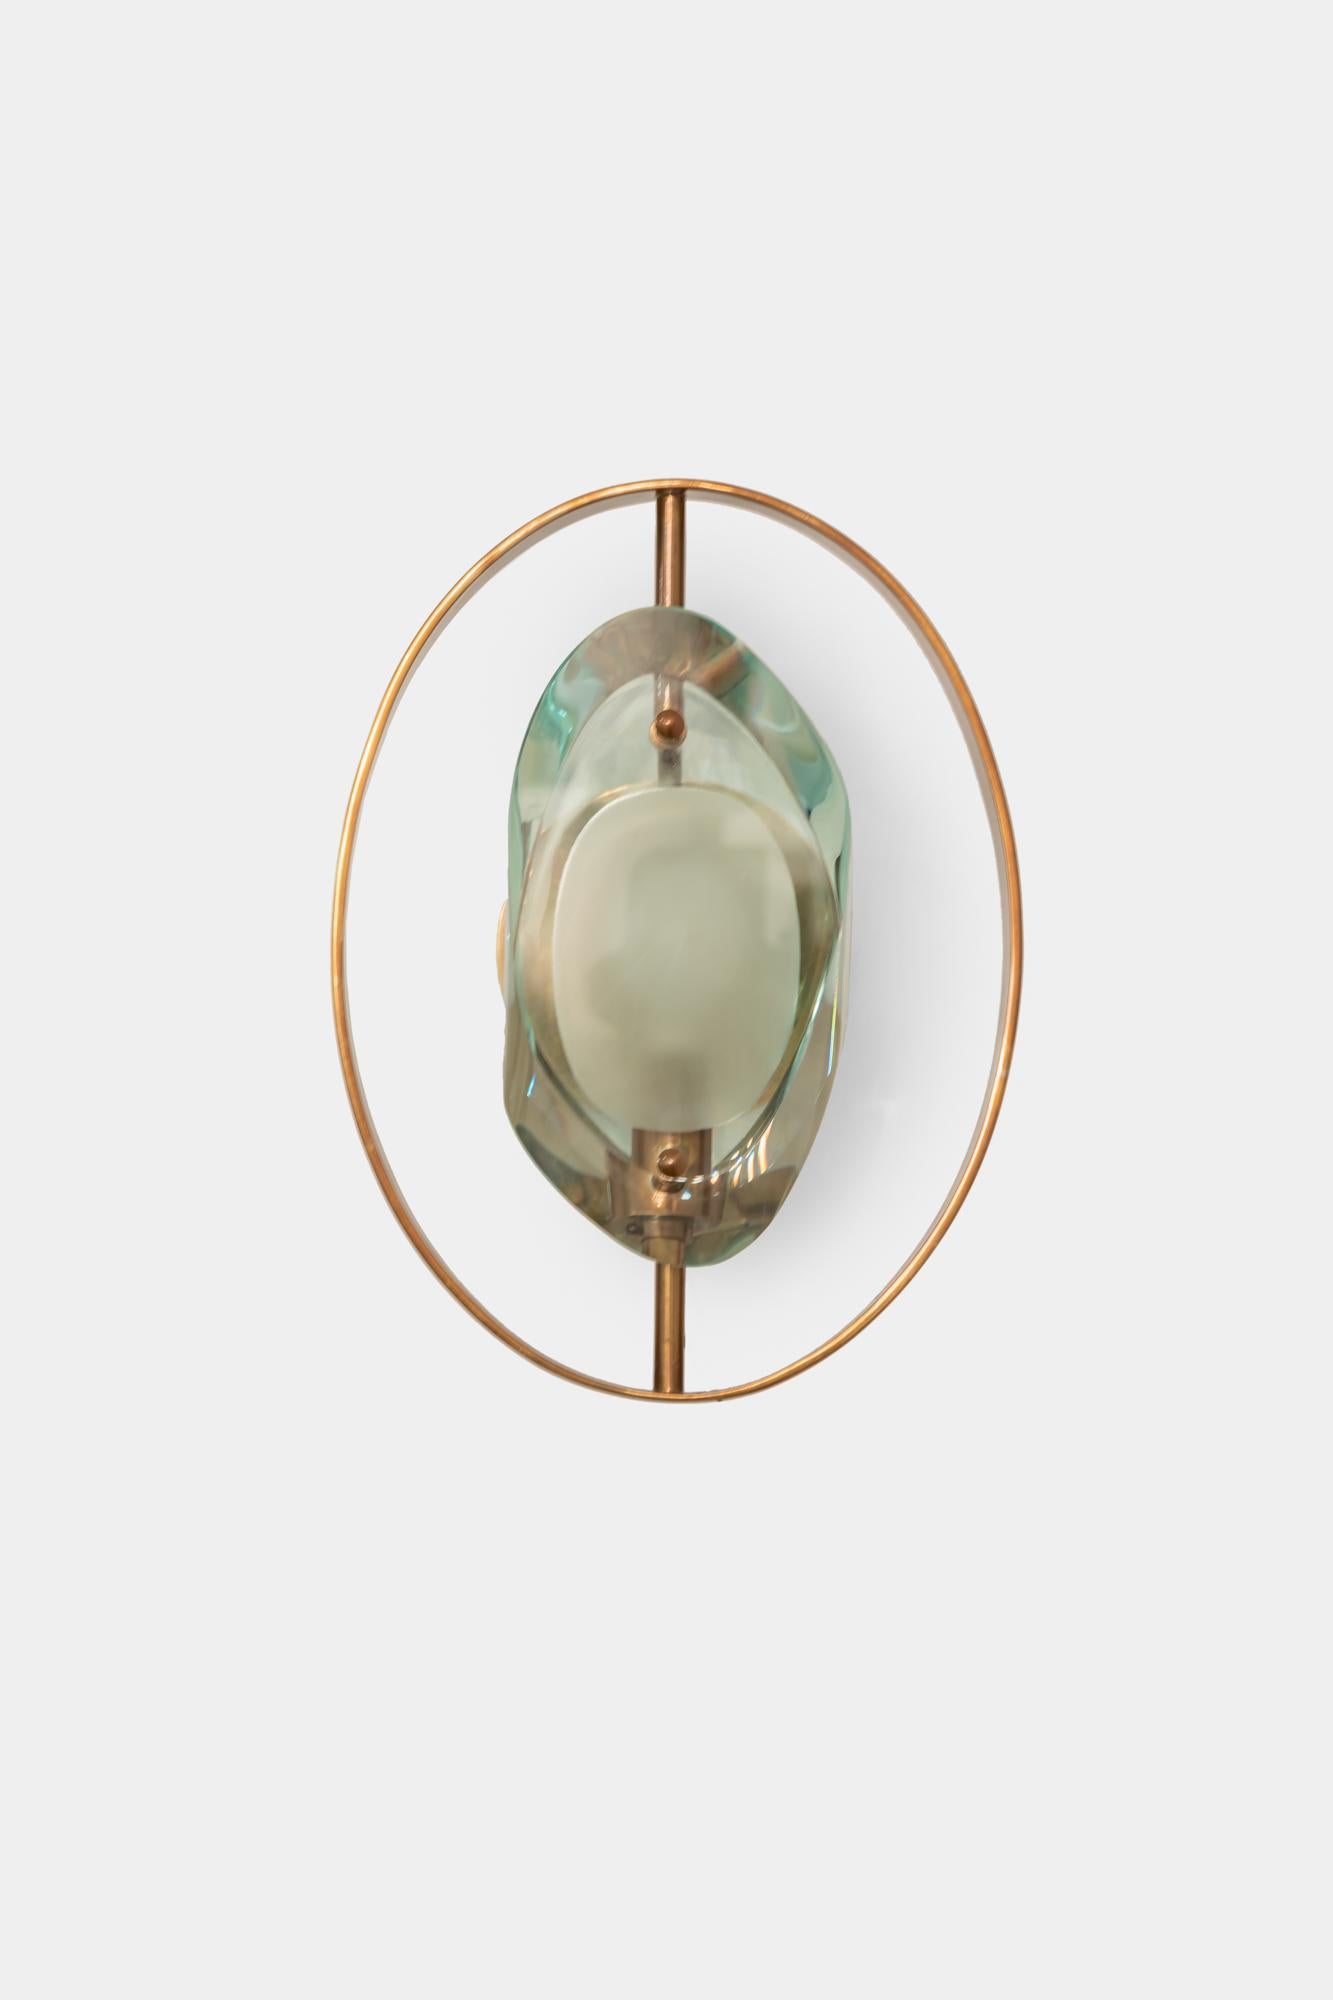 Max Ingrand for Fontana Arte rare pair of 'Micro' sconces model 2240 with double lens cut panels of thick profiled polished glass with acid-etched glass centers and brass fittings.
Newly rewired to U.S. standards including UL listing with custom